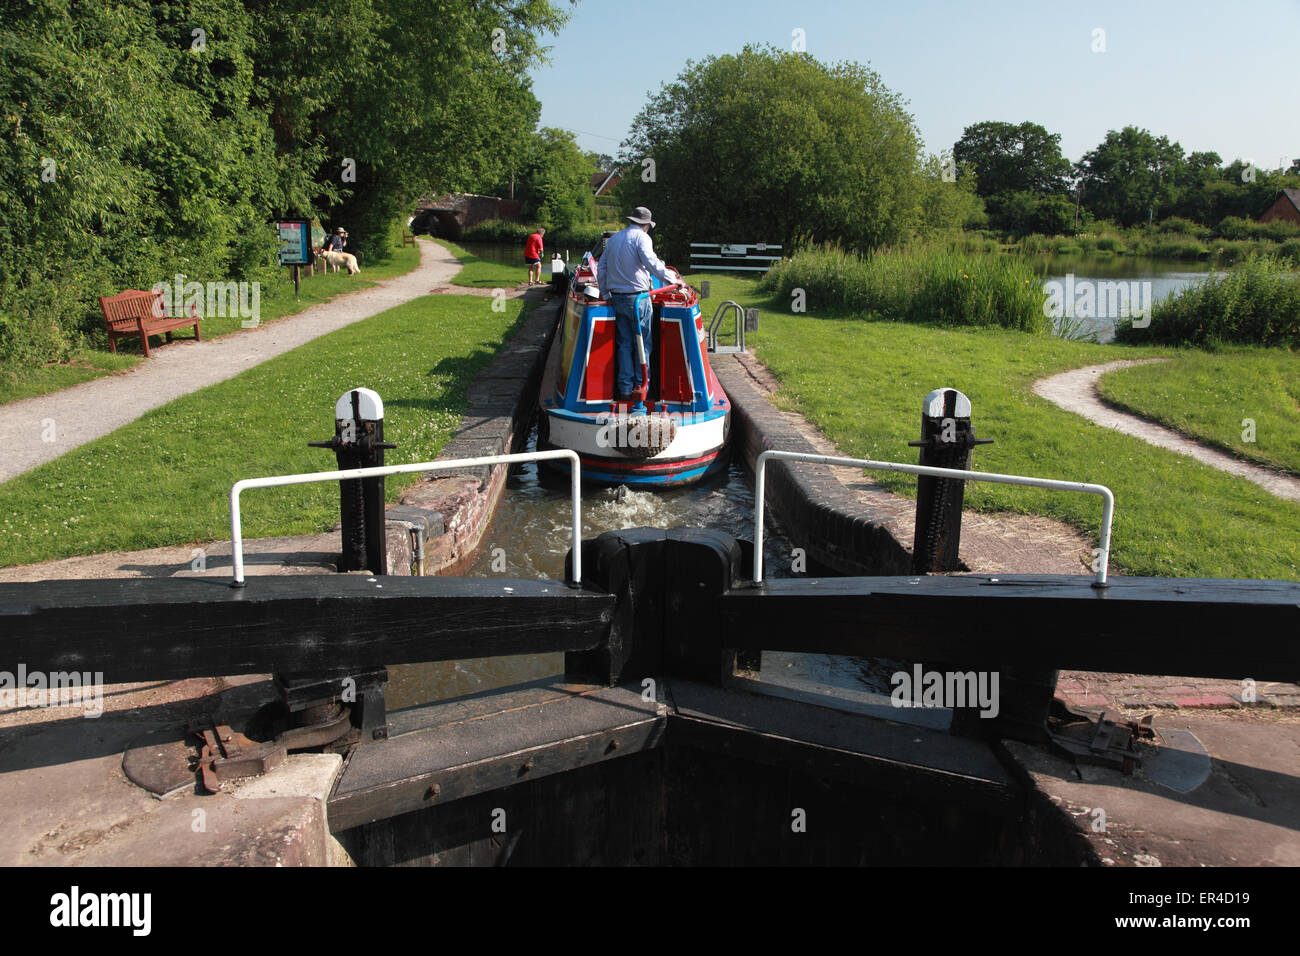 A narrowboat in Lock 19 of the Lapworth flight at Kingswood Junction on the Stratford on Avon Canal, Solihull, England Stock Photo